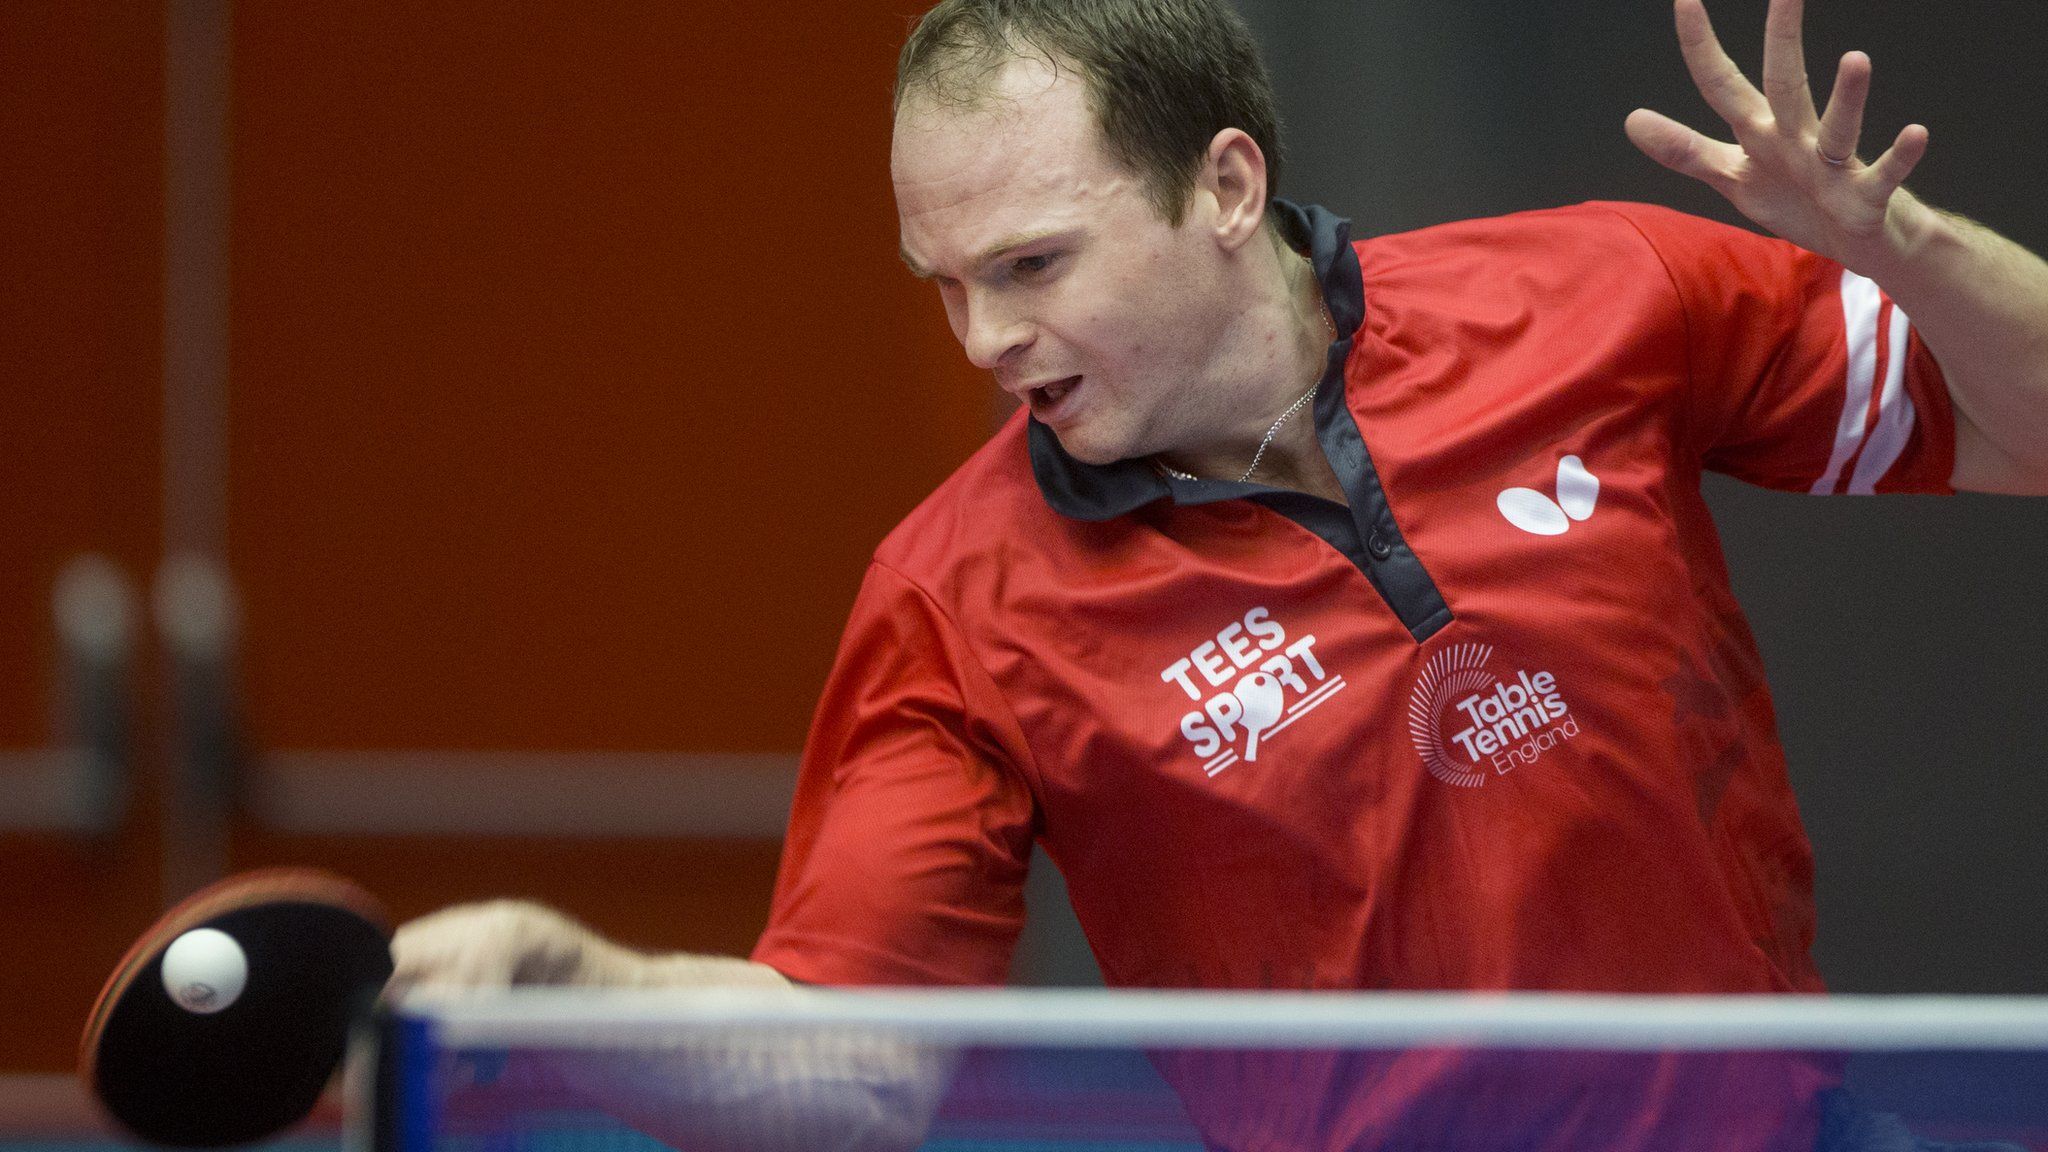 Rio 2016: GB's Drinkhall and Pitchford selected for table tennis - BBC ...